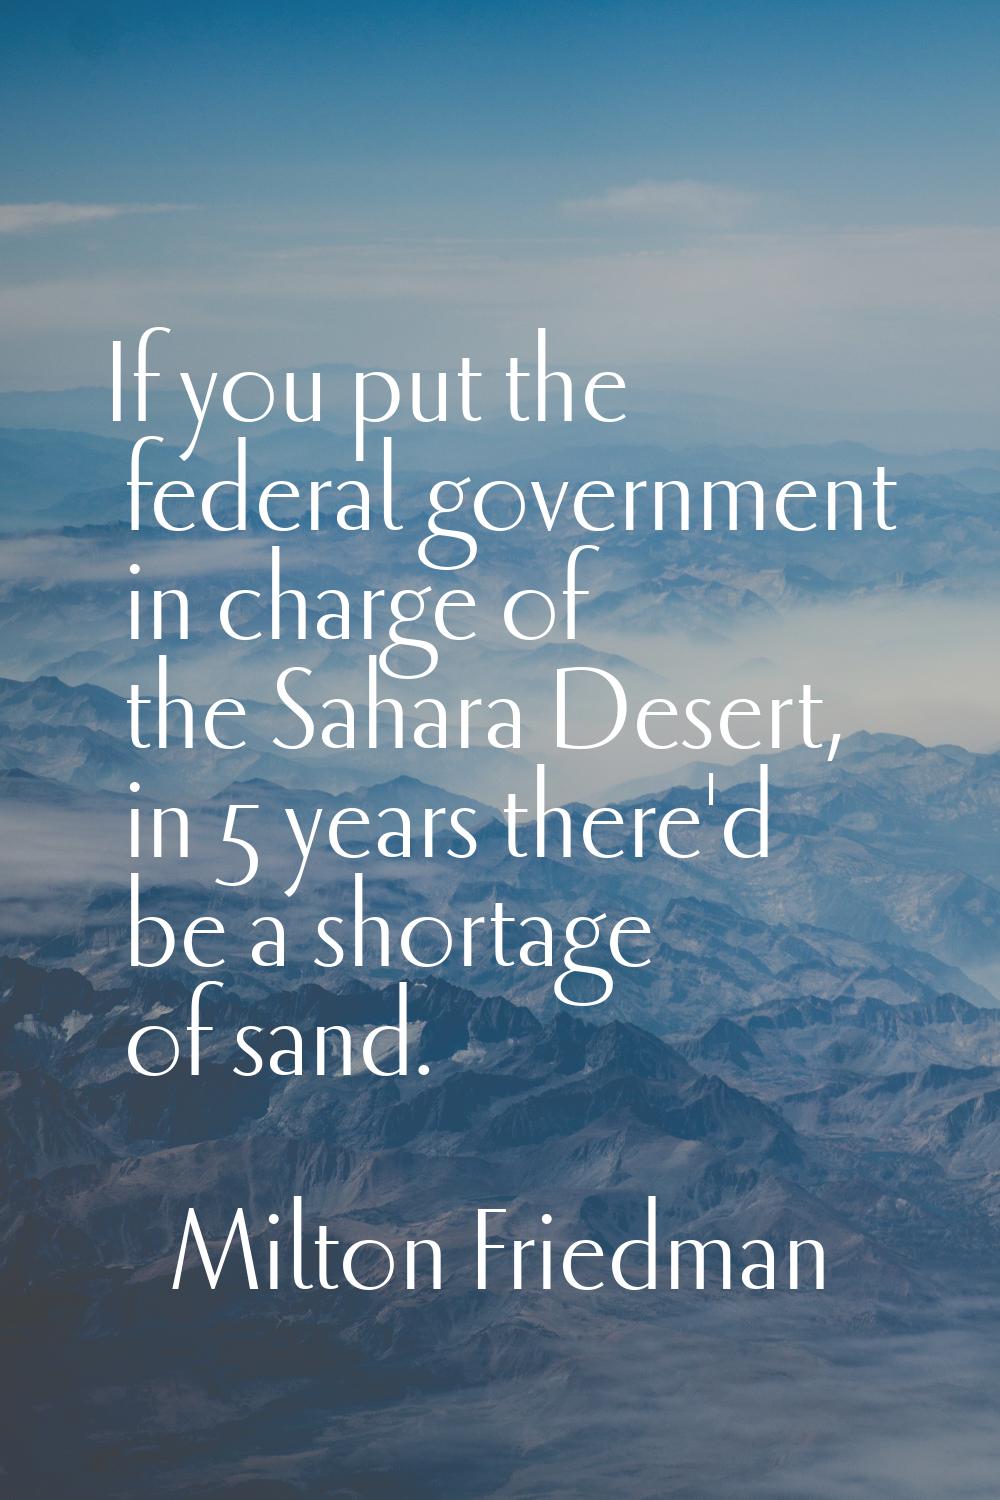 If you put the federal government in charge of the Sahara Desert, in 5 years there'd be a shortage 